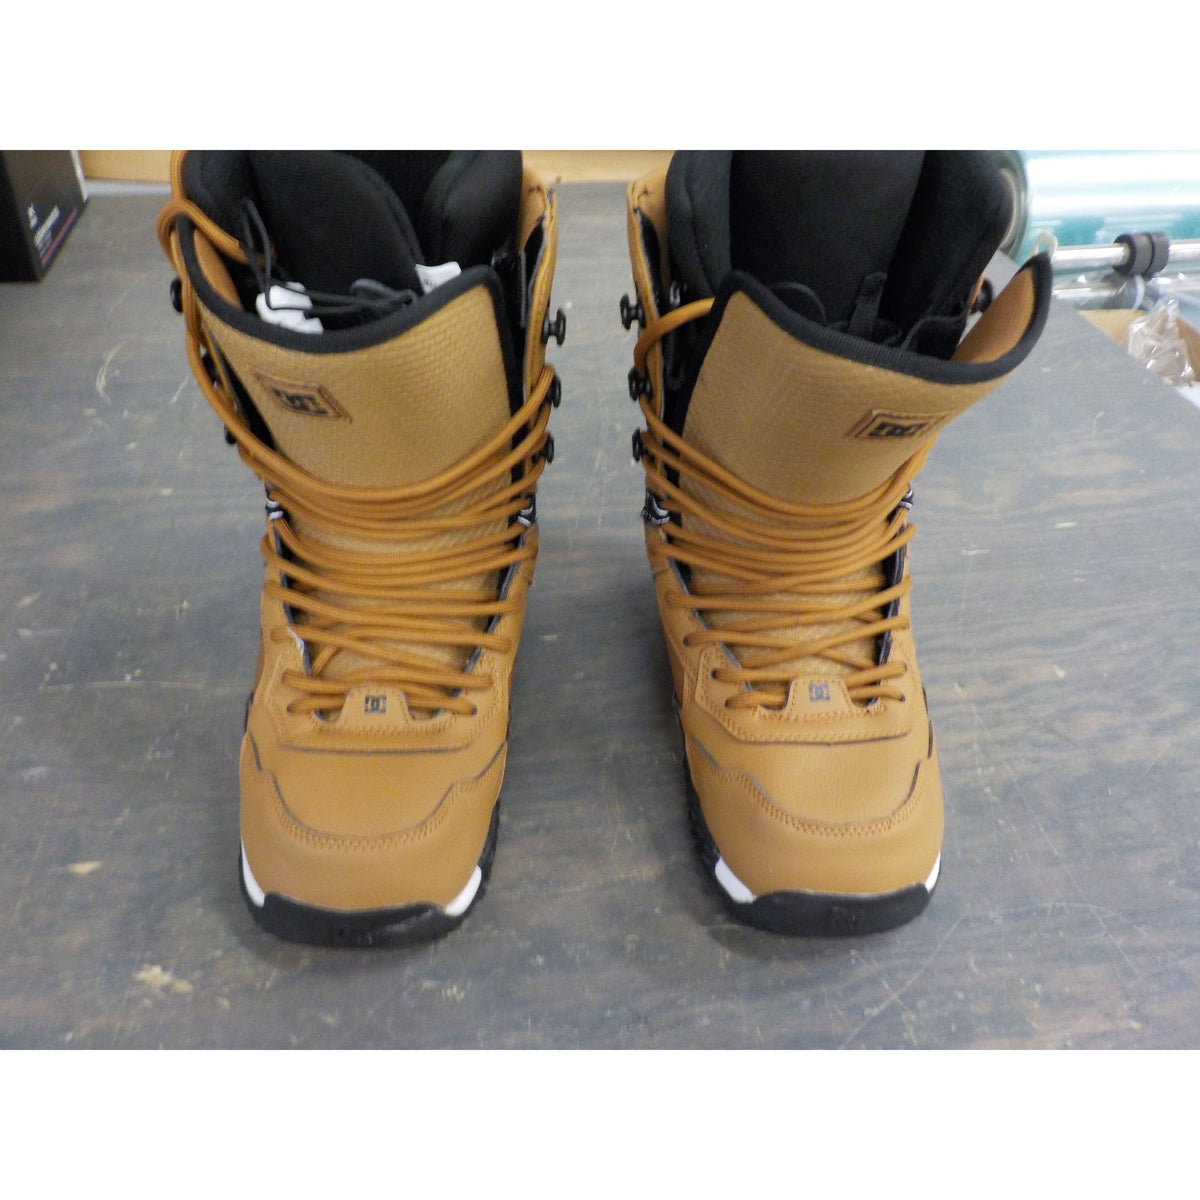 DC Men&#39;s Mutiny Lace Snowboard Boots - Wheat/Black - 8.5 - Used - Acceptable